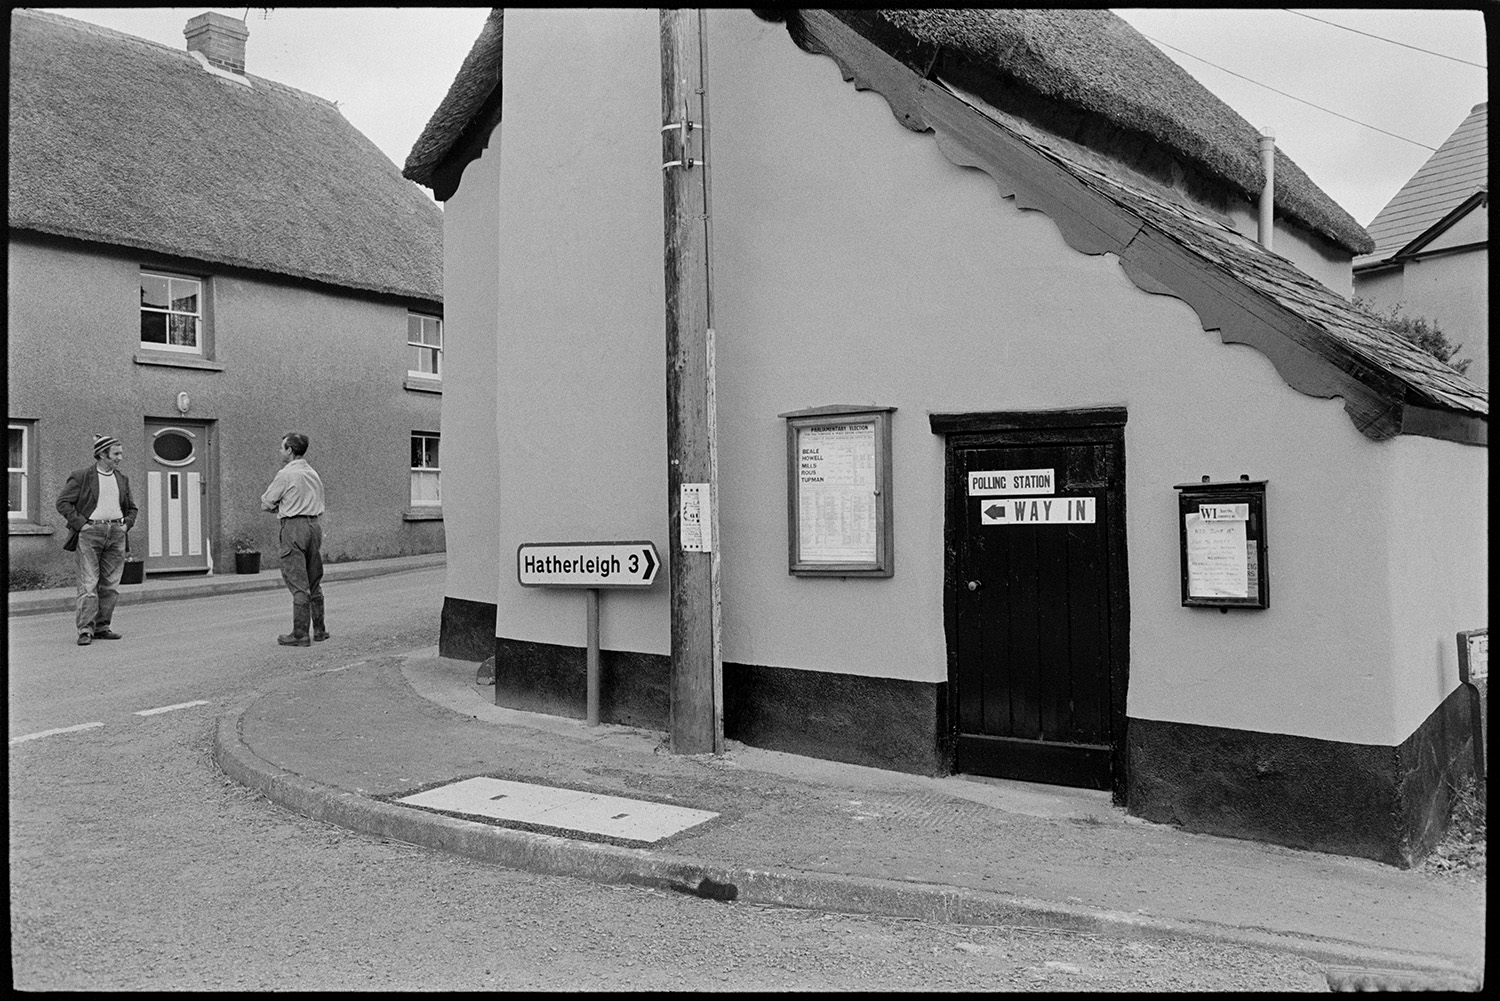 Notices on village polling station.
[A thatched cottage with a 'Polling Station' poster and notice boards attached to its wall, at Monkokehampton. Two men are talking in street outside.]